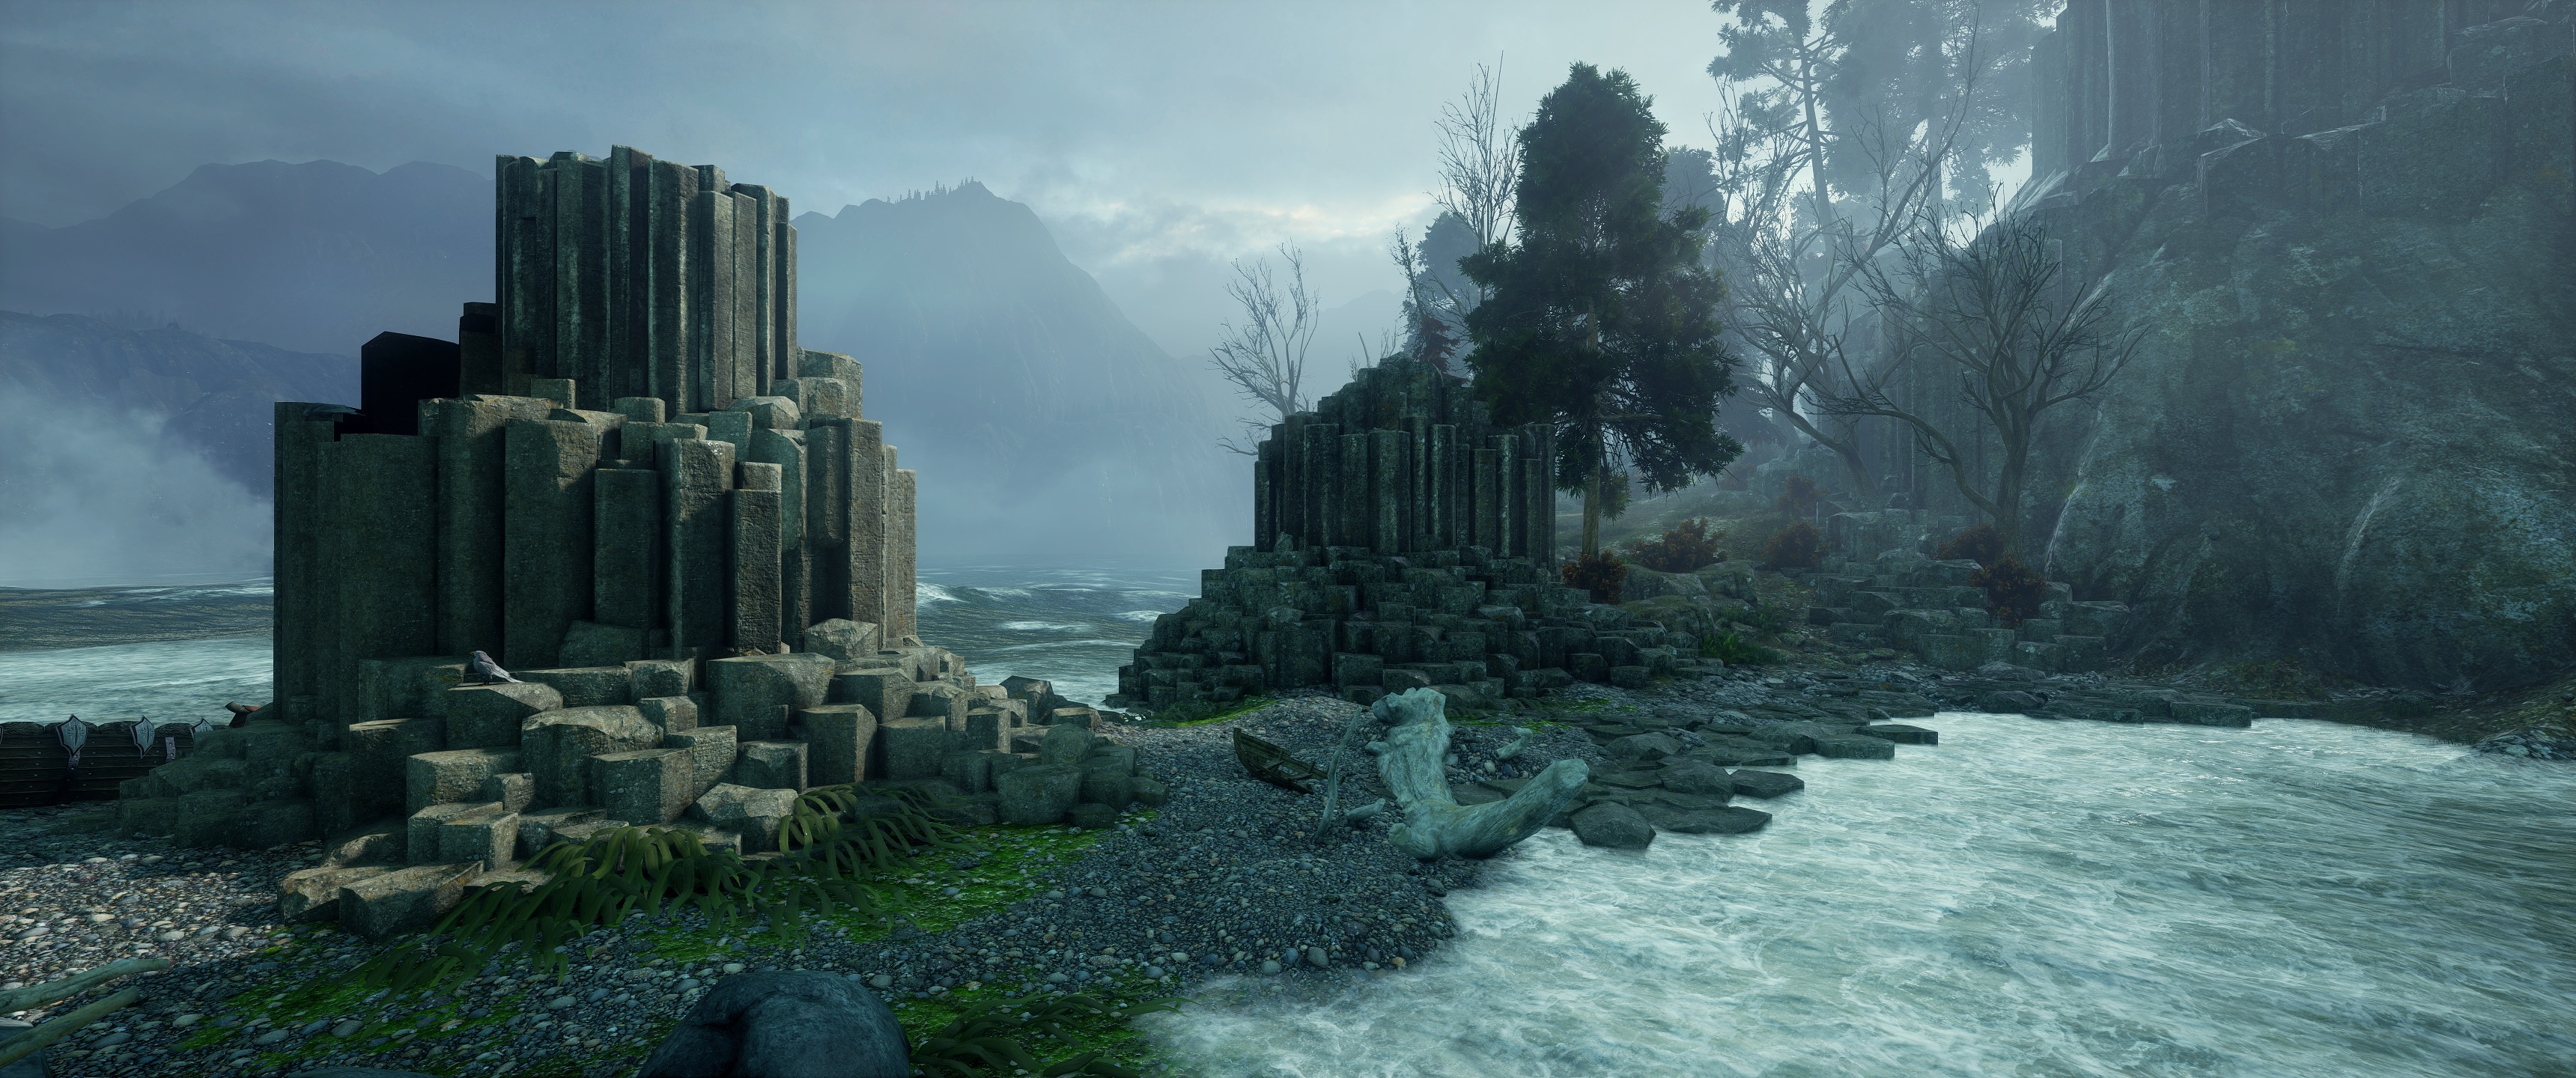 General 3440x1440 Dragon Age: Inquisition video games Game CG screen shot Bioware water trees